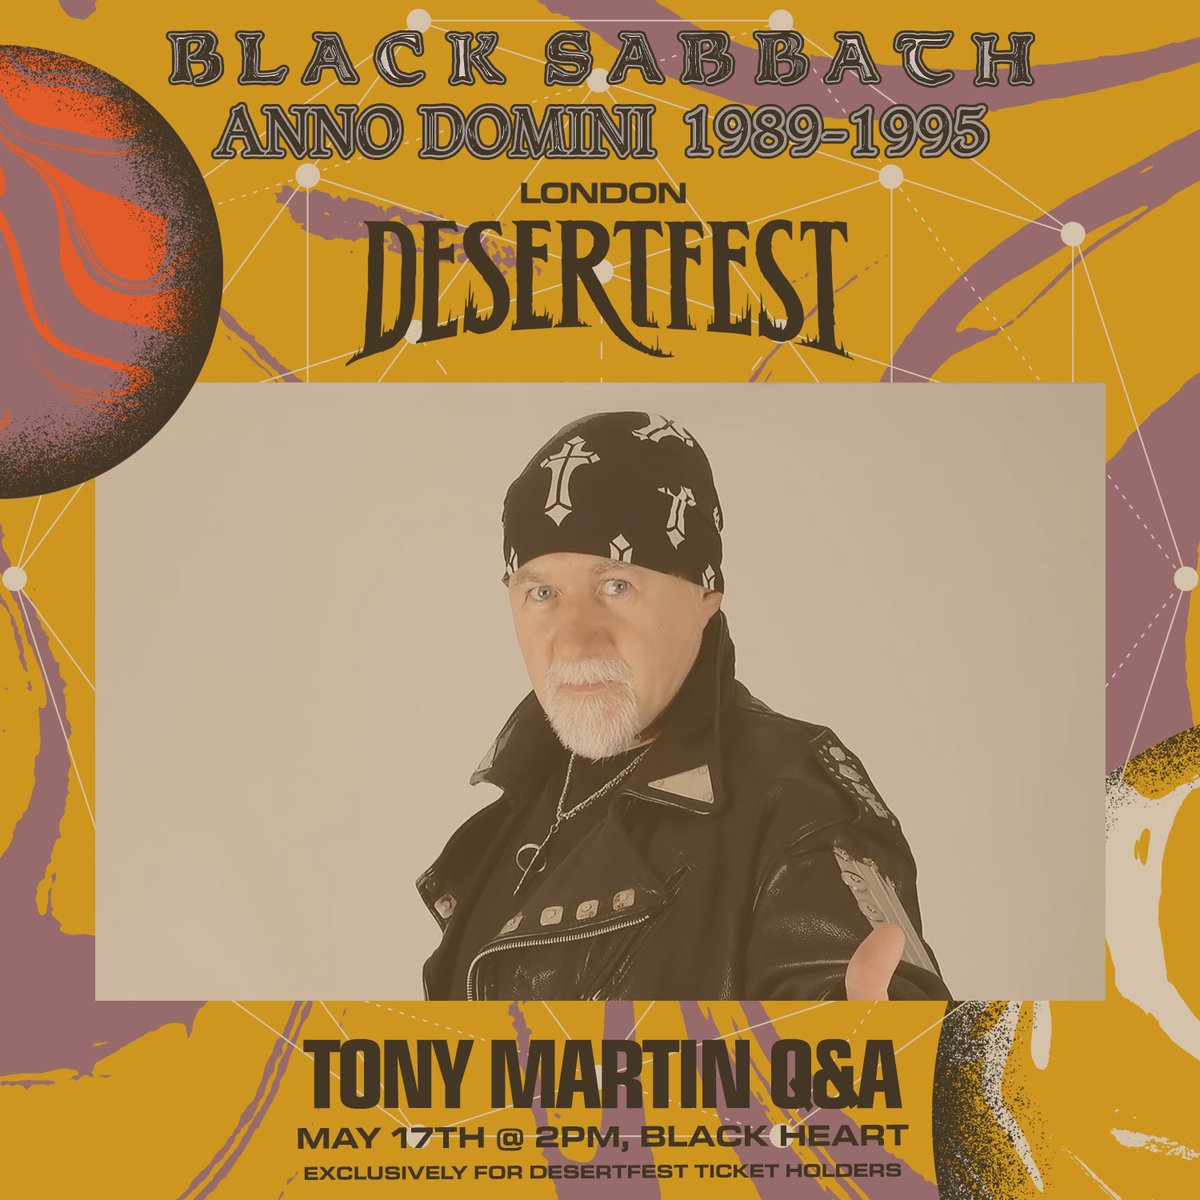 Announcing Tony Martin will be appearing at the Black Heart on 17th May at 2pm as part of the UK’s leading doom & stoner rock festival Desertfest London, where he’ll be in conversation with Alexander Milas about his time fronting this era of Black Sabbath and the forthcoming Anno…